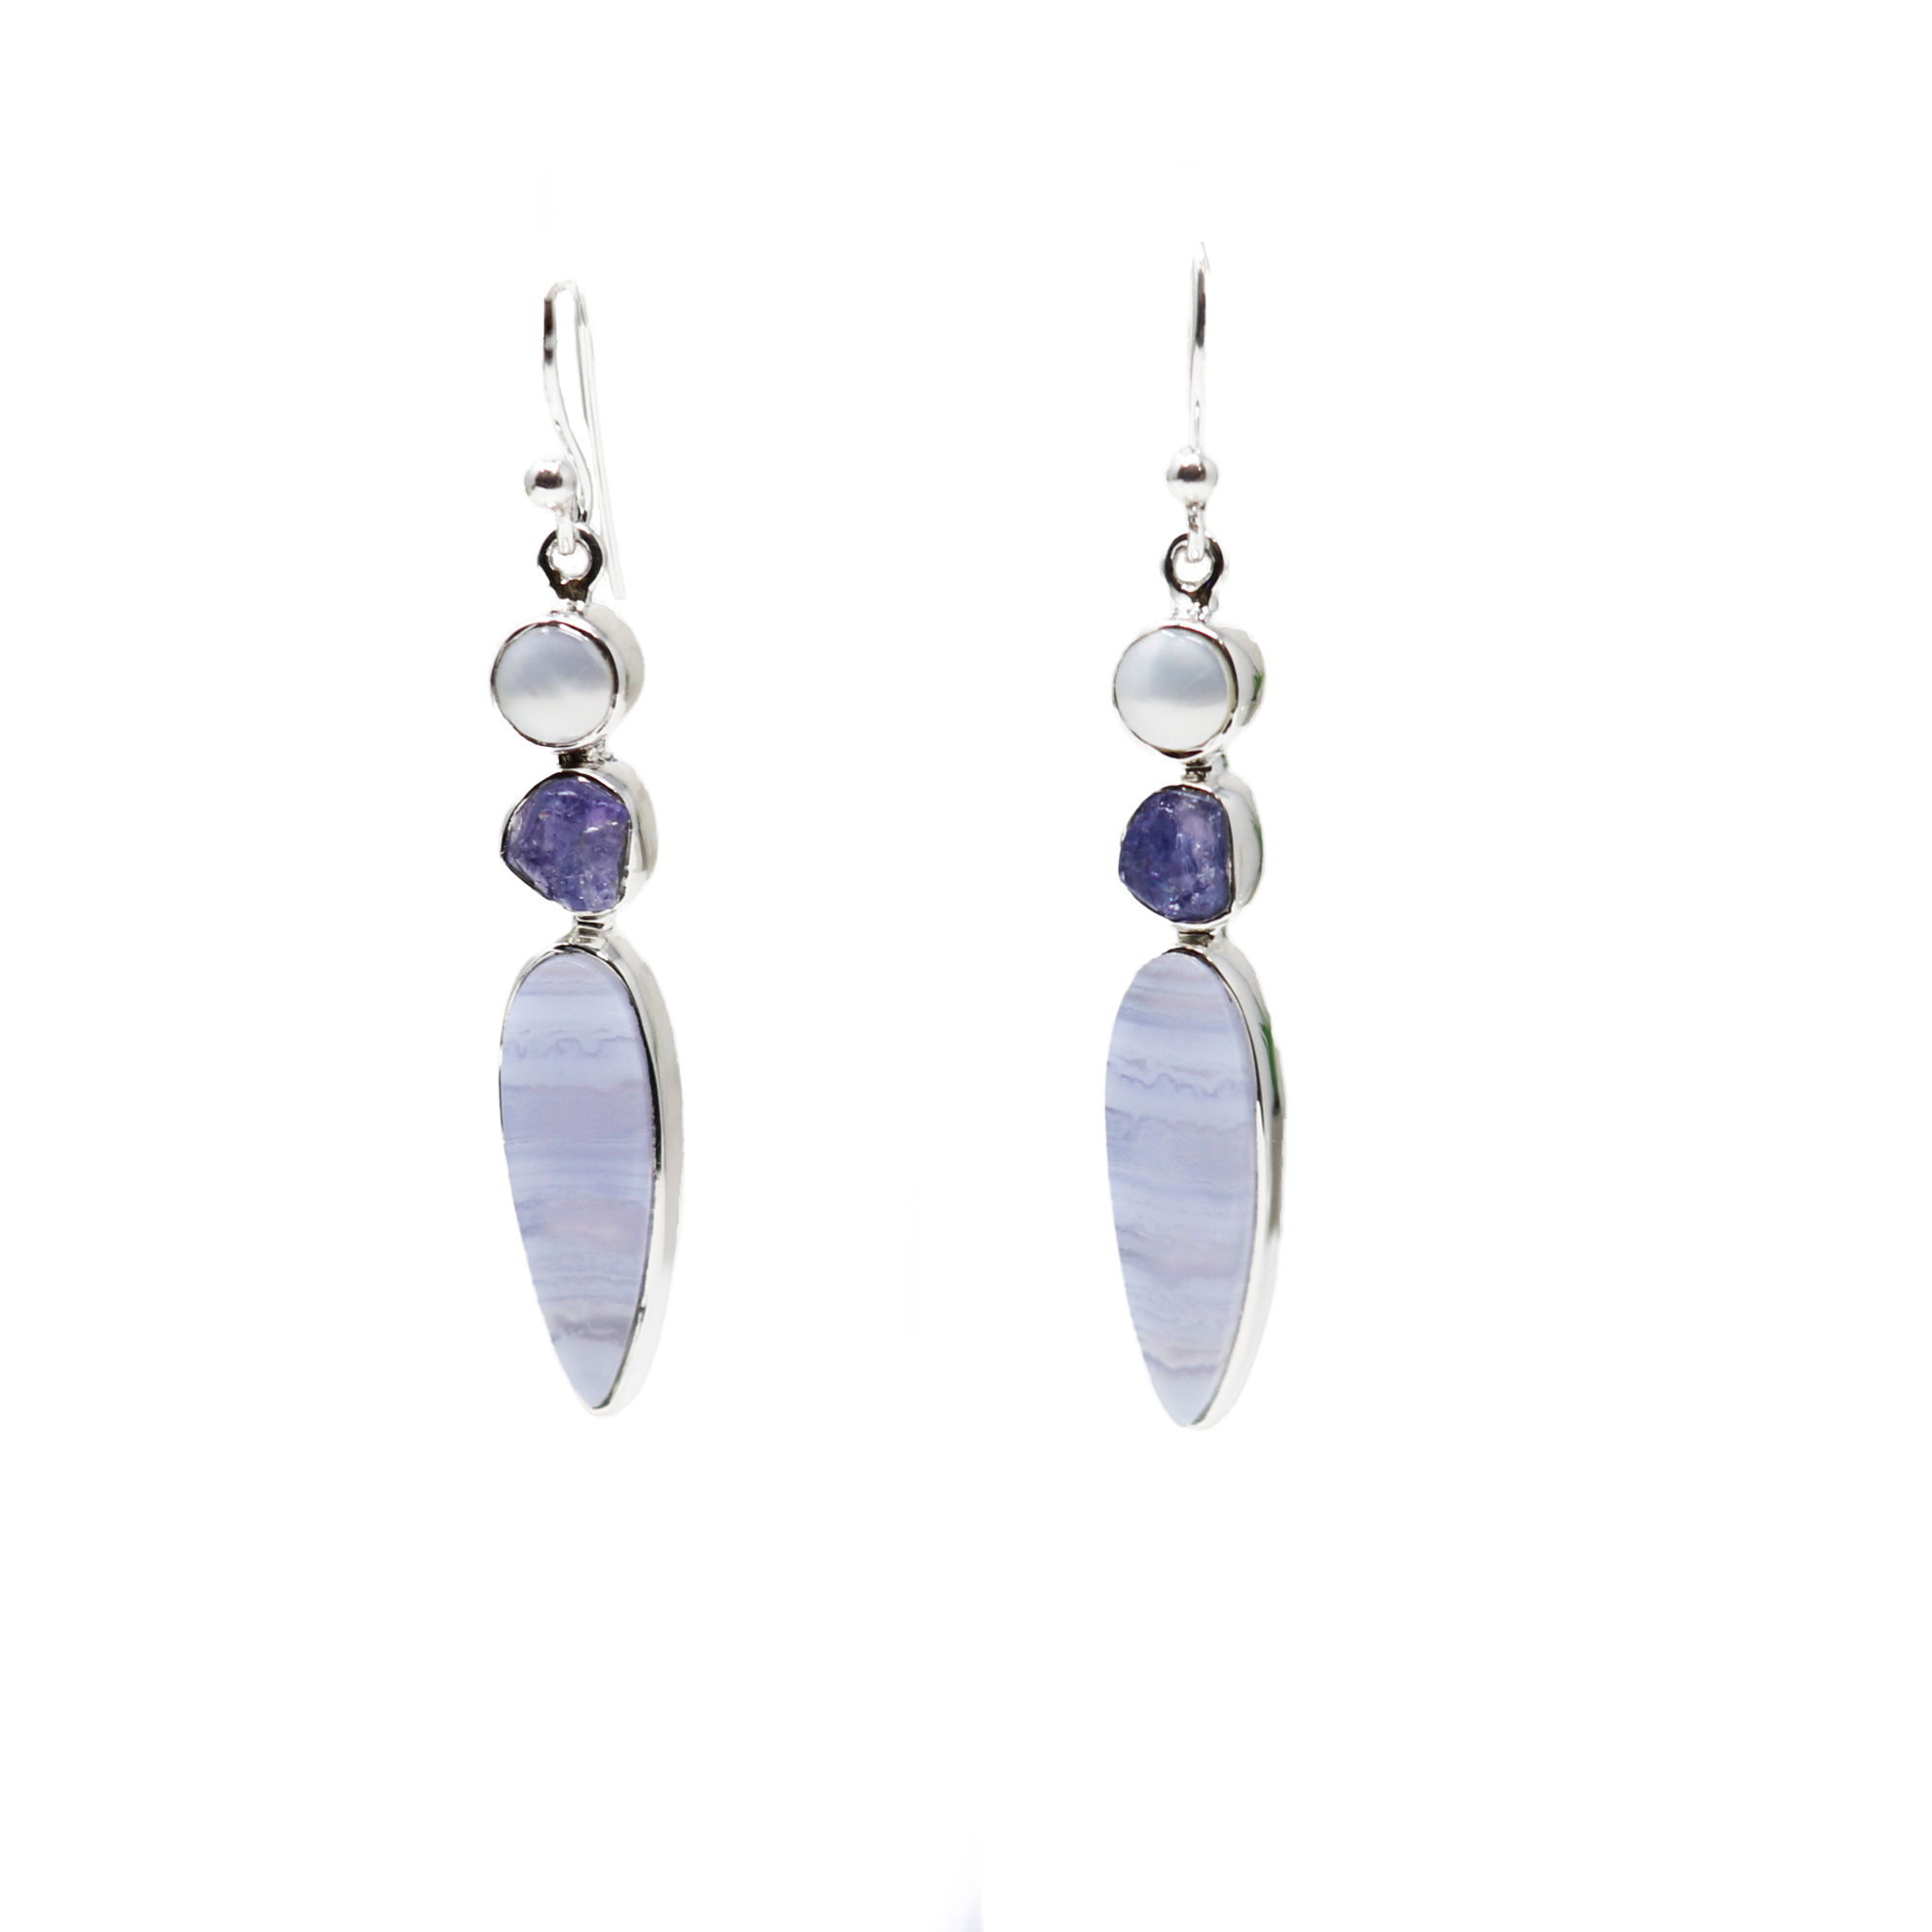 Blue Lace Agate Dangle Earrings - Elongated Reverse Pear with Rough Tanzanite & Freshwater Pearl Round - 925 Sterling Silver Bezels